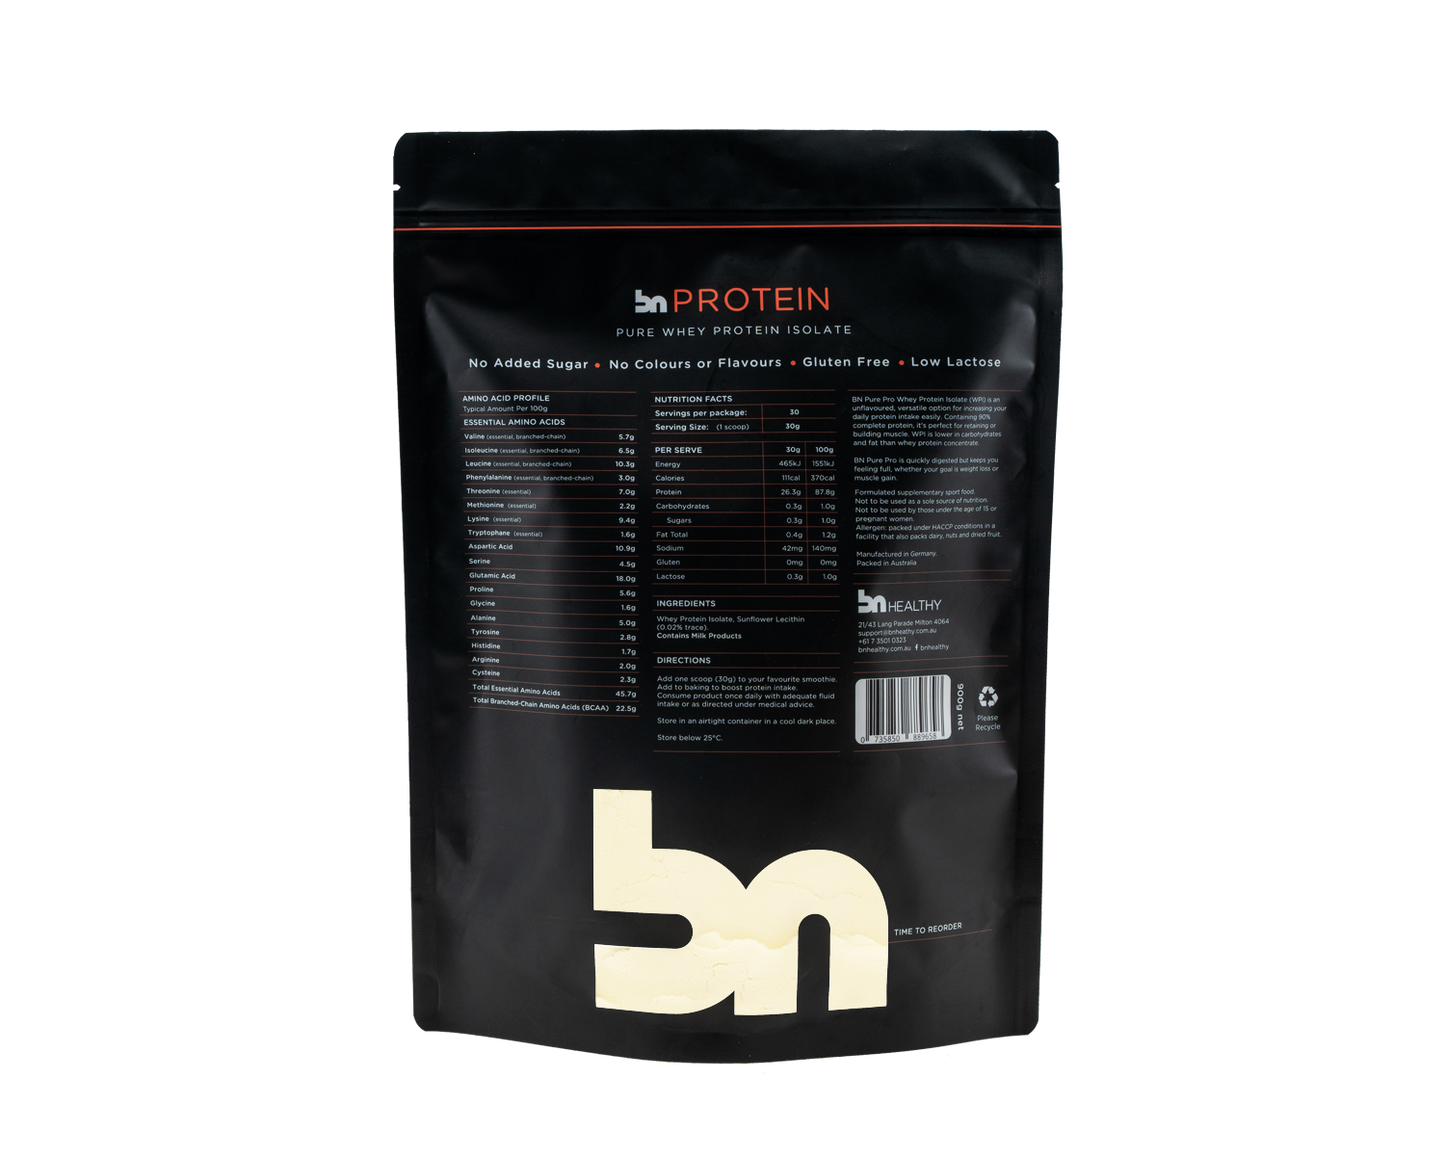 BN Protein - Whey Protein Isolate Powder packet cover back